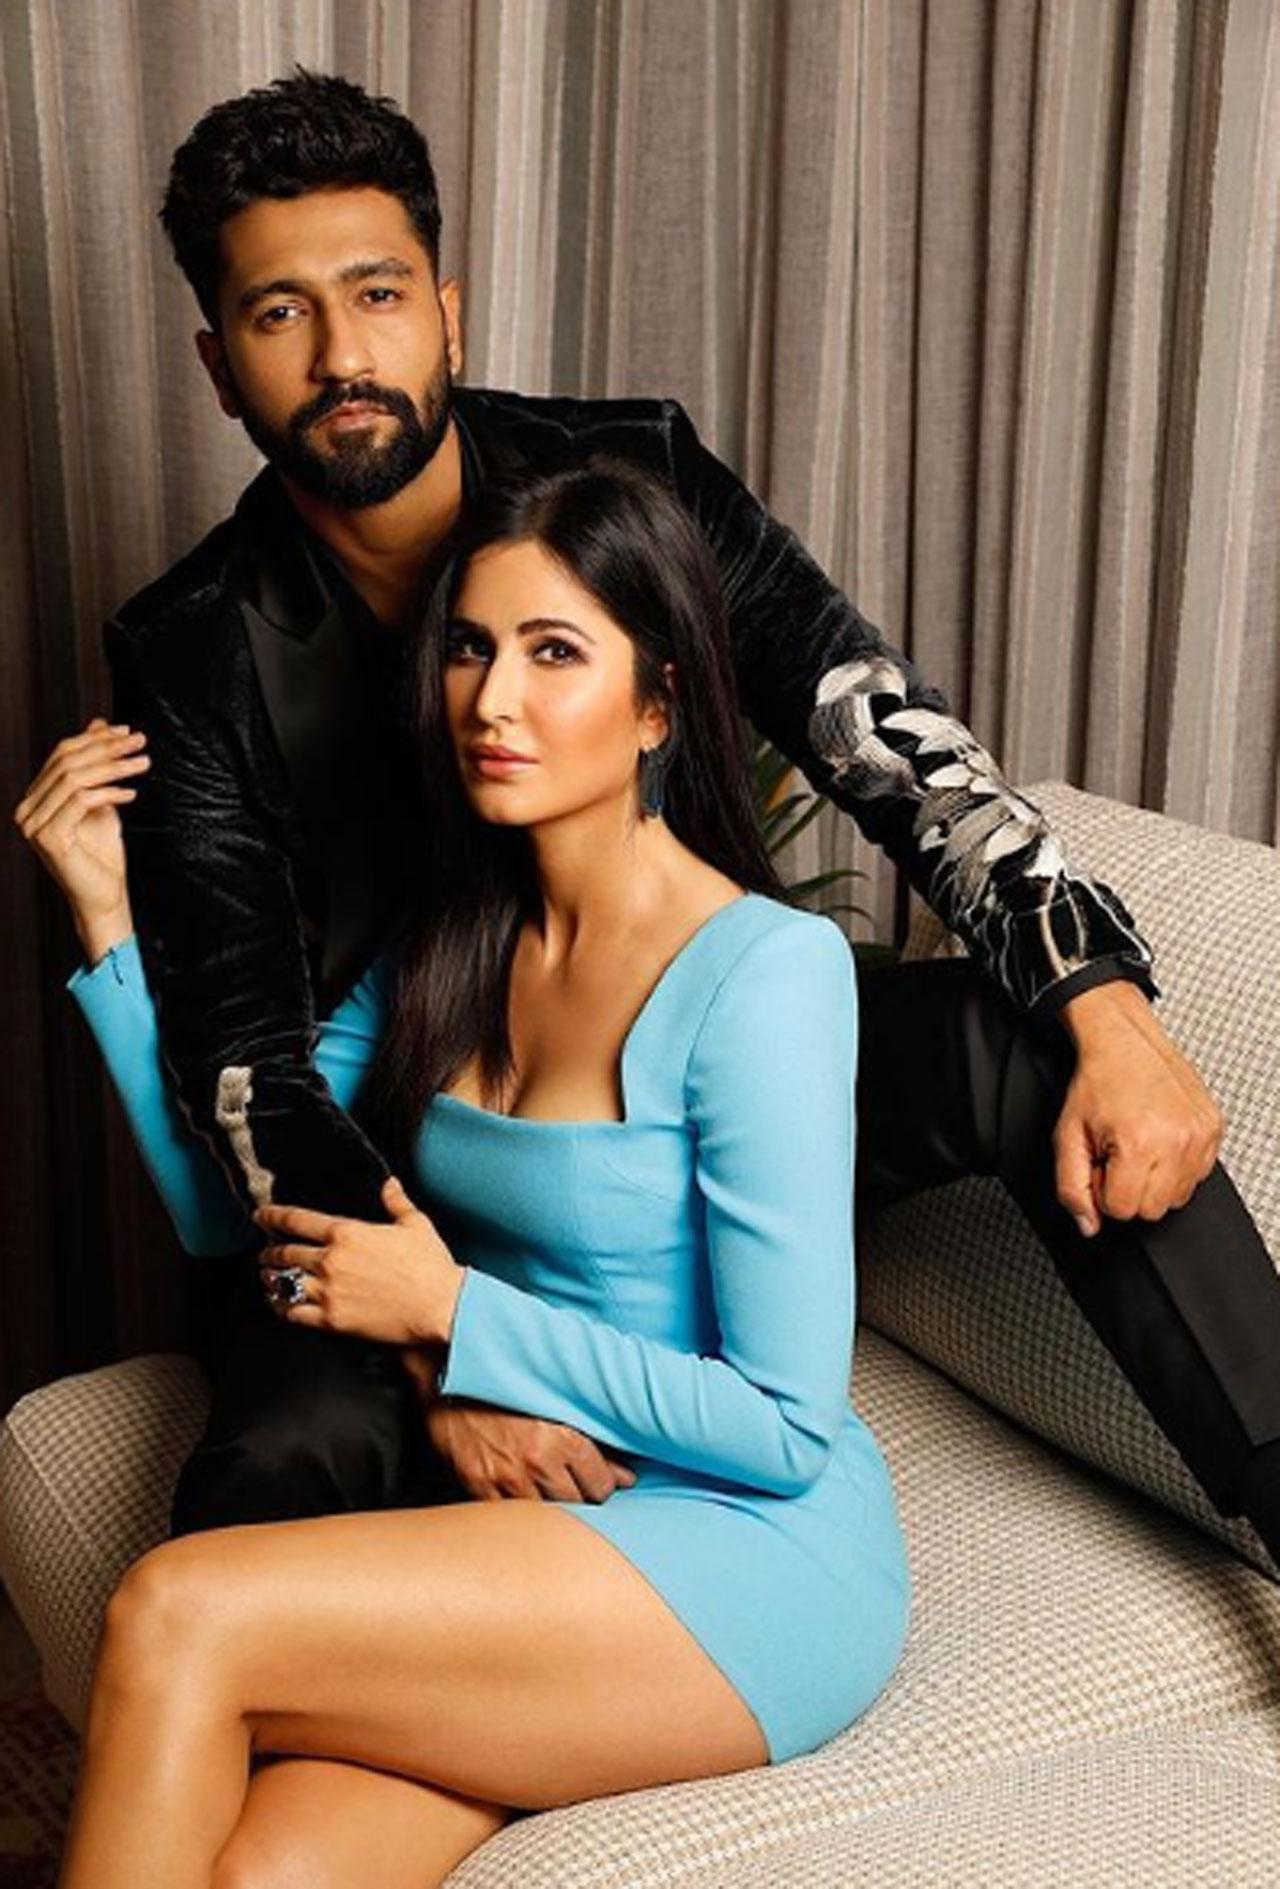 The couple was all dressed up to the T for this click, the man in black and the woman in blue, smoldering auras scorching the screens. Meanwhile, on the work front, both Vicky and Katrina have an interesting movie lineup. Vicky Kaushal will star in 'Govinda Nam Mera' with Boomi Pedneker and Kiara Advani. He also owns an untitled movie of Laxman Utekar starring Sara Ali Khan. Vicky will appear in 'Sam Bahadur' of Meghna Gulzar.